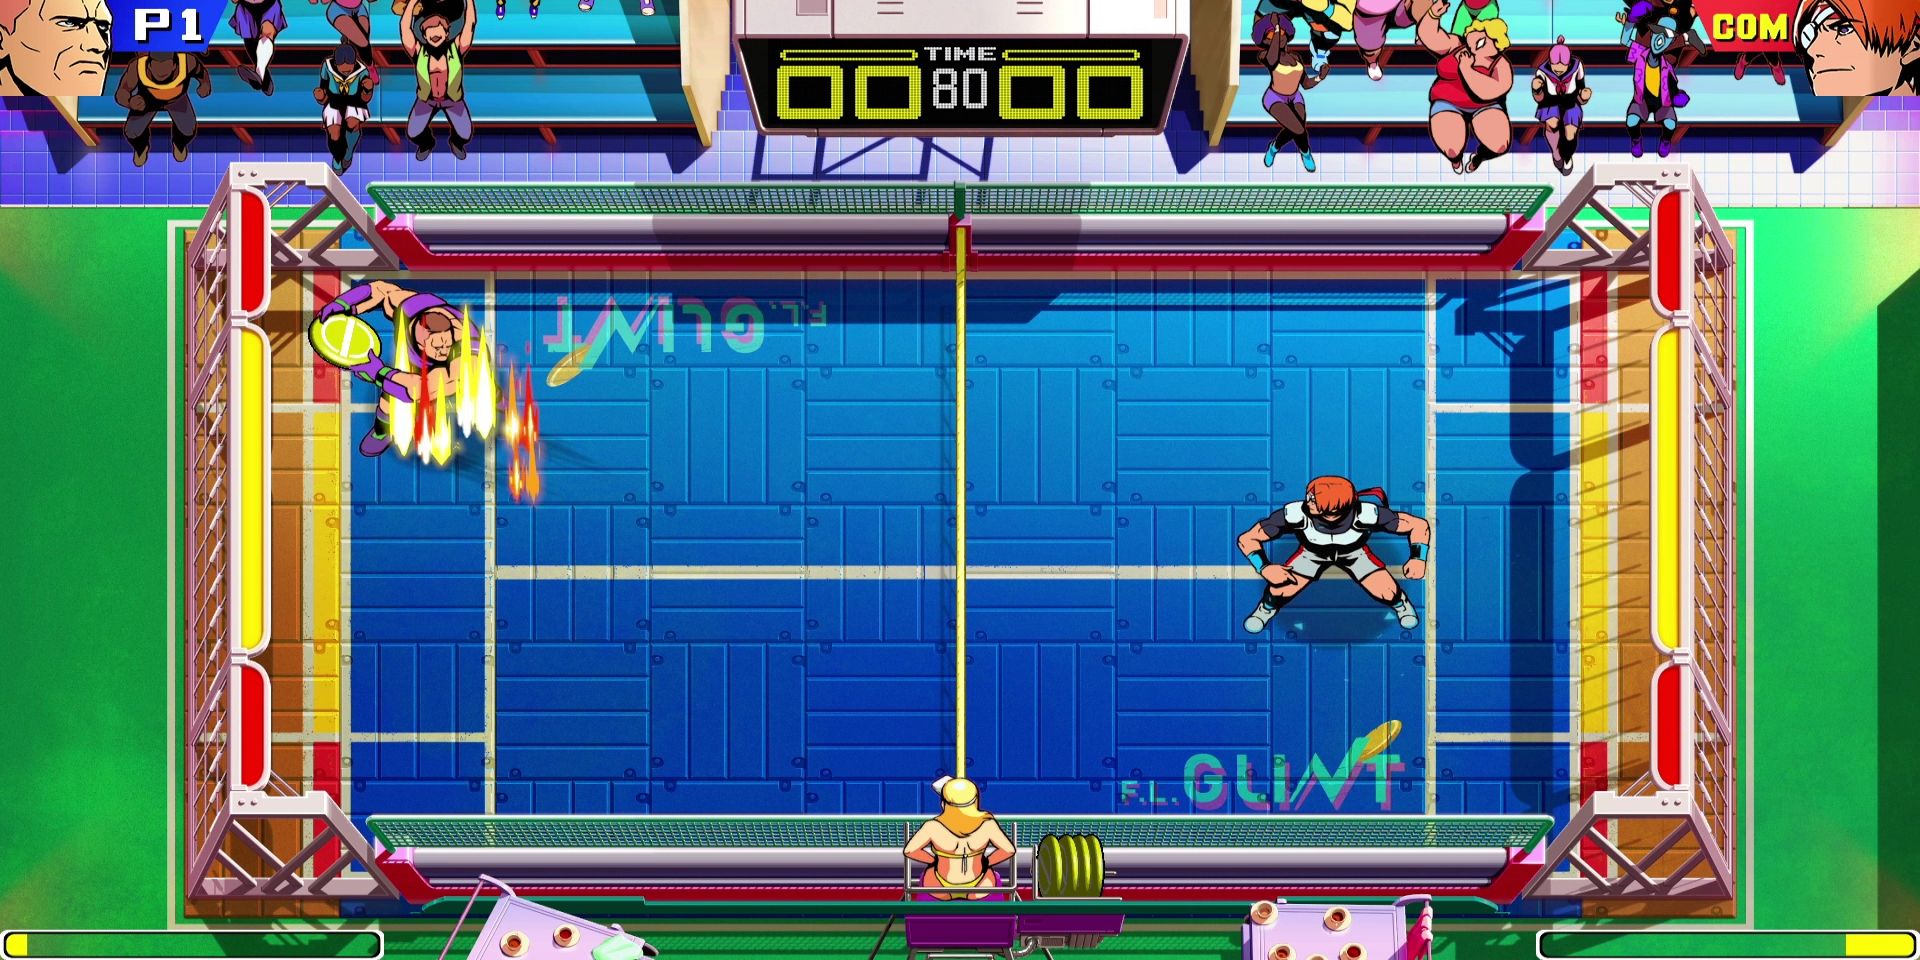 Windjammers 2: Costa charges a shot while Miller waits for the return. 